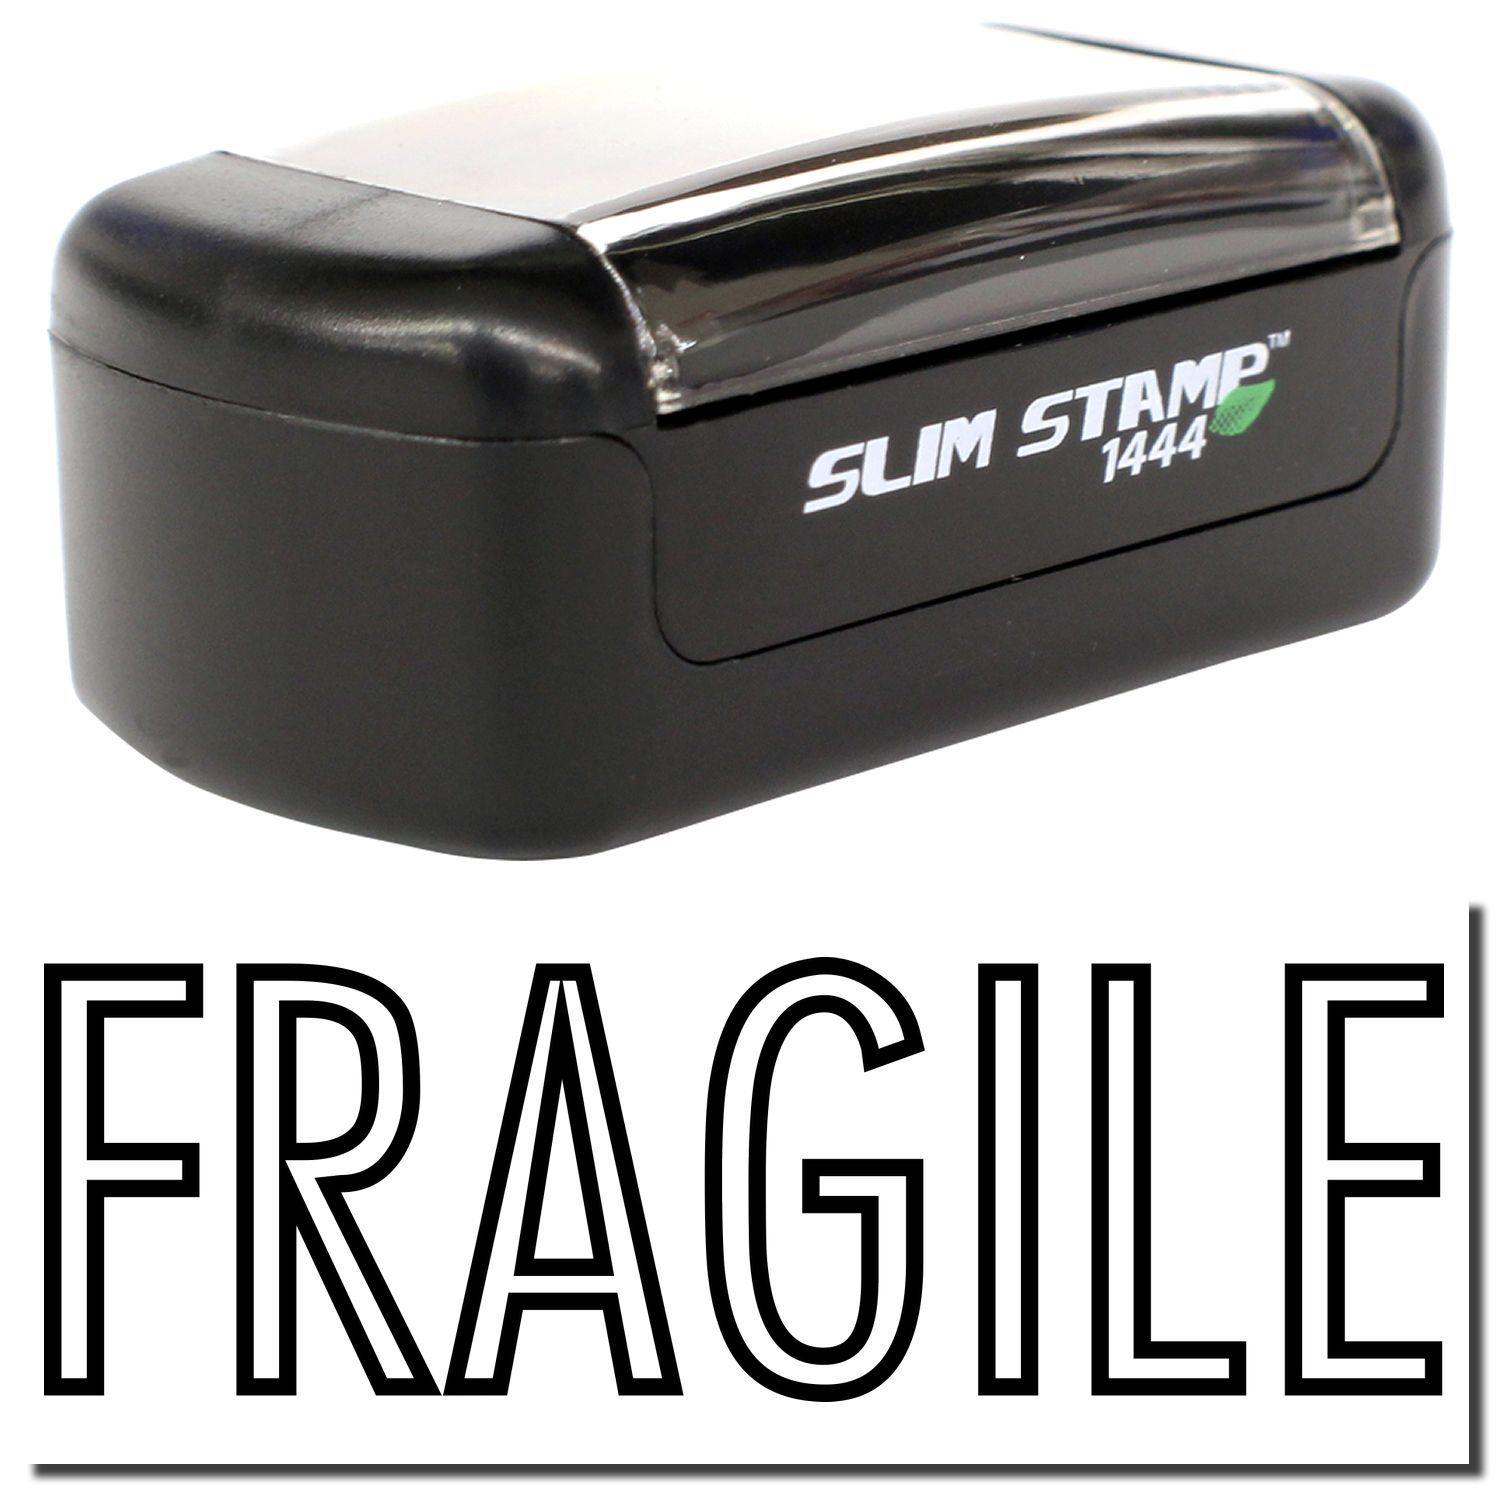 A stock office pre-inked stamp with a stamped image showing how the text "FRAGILE" in an outline font is displayed after stamping.